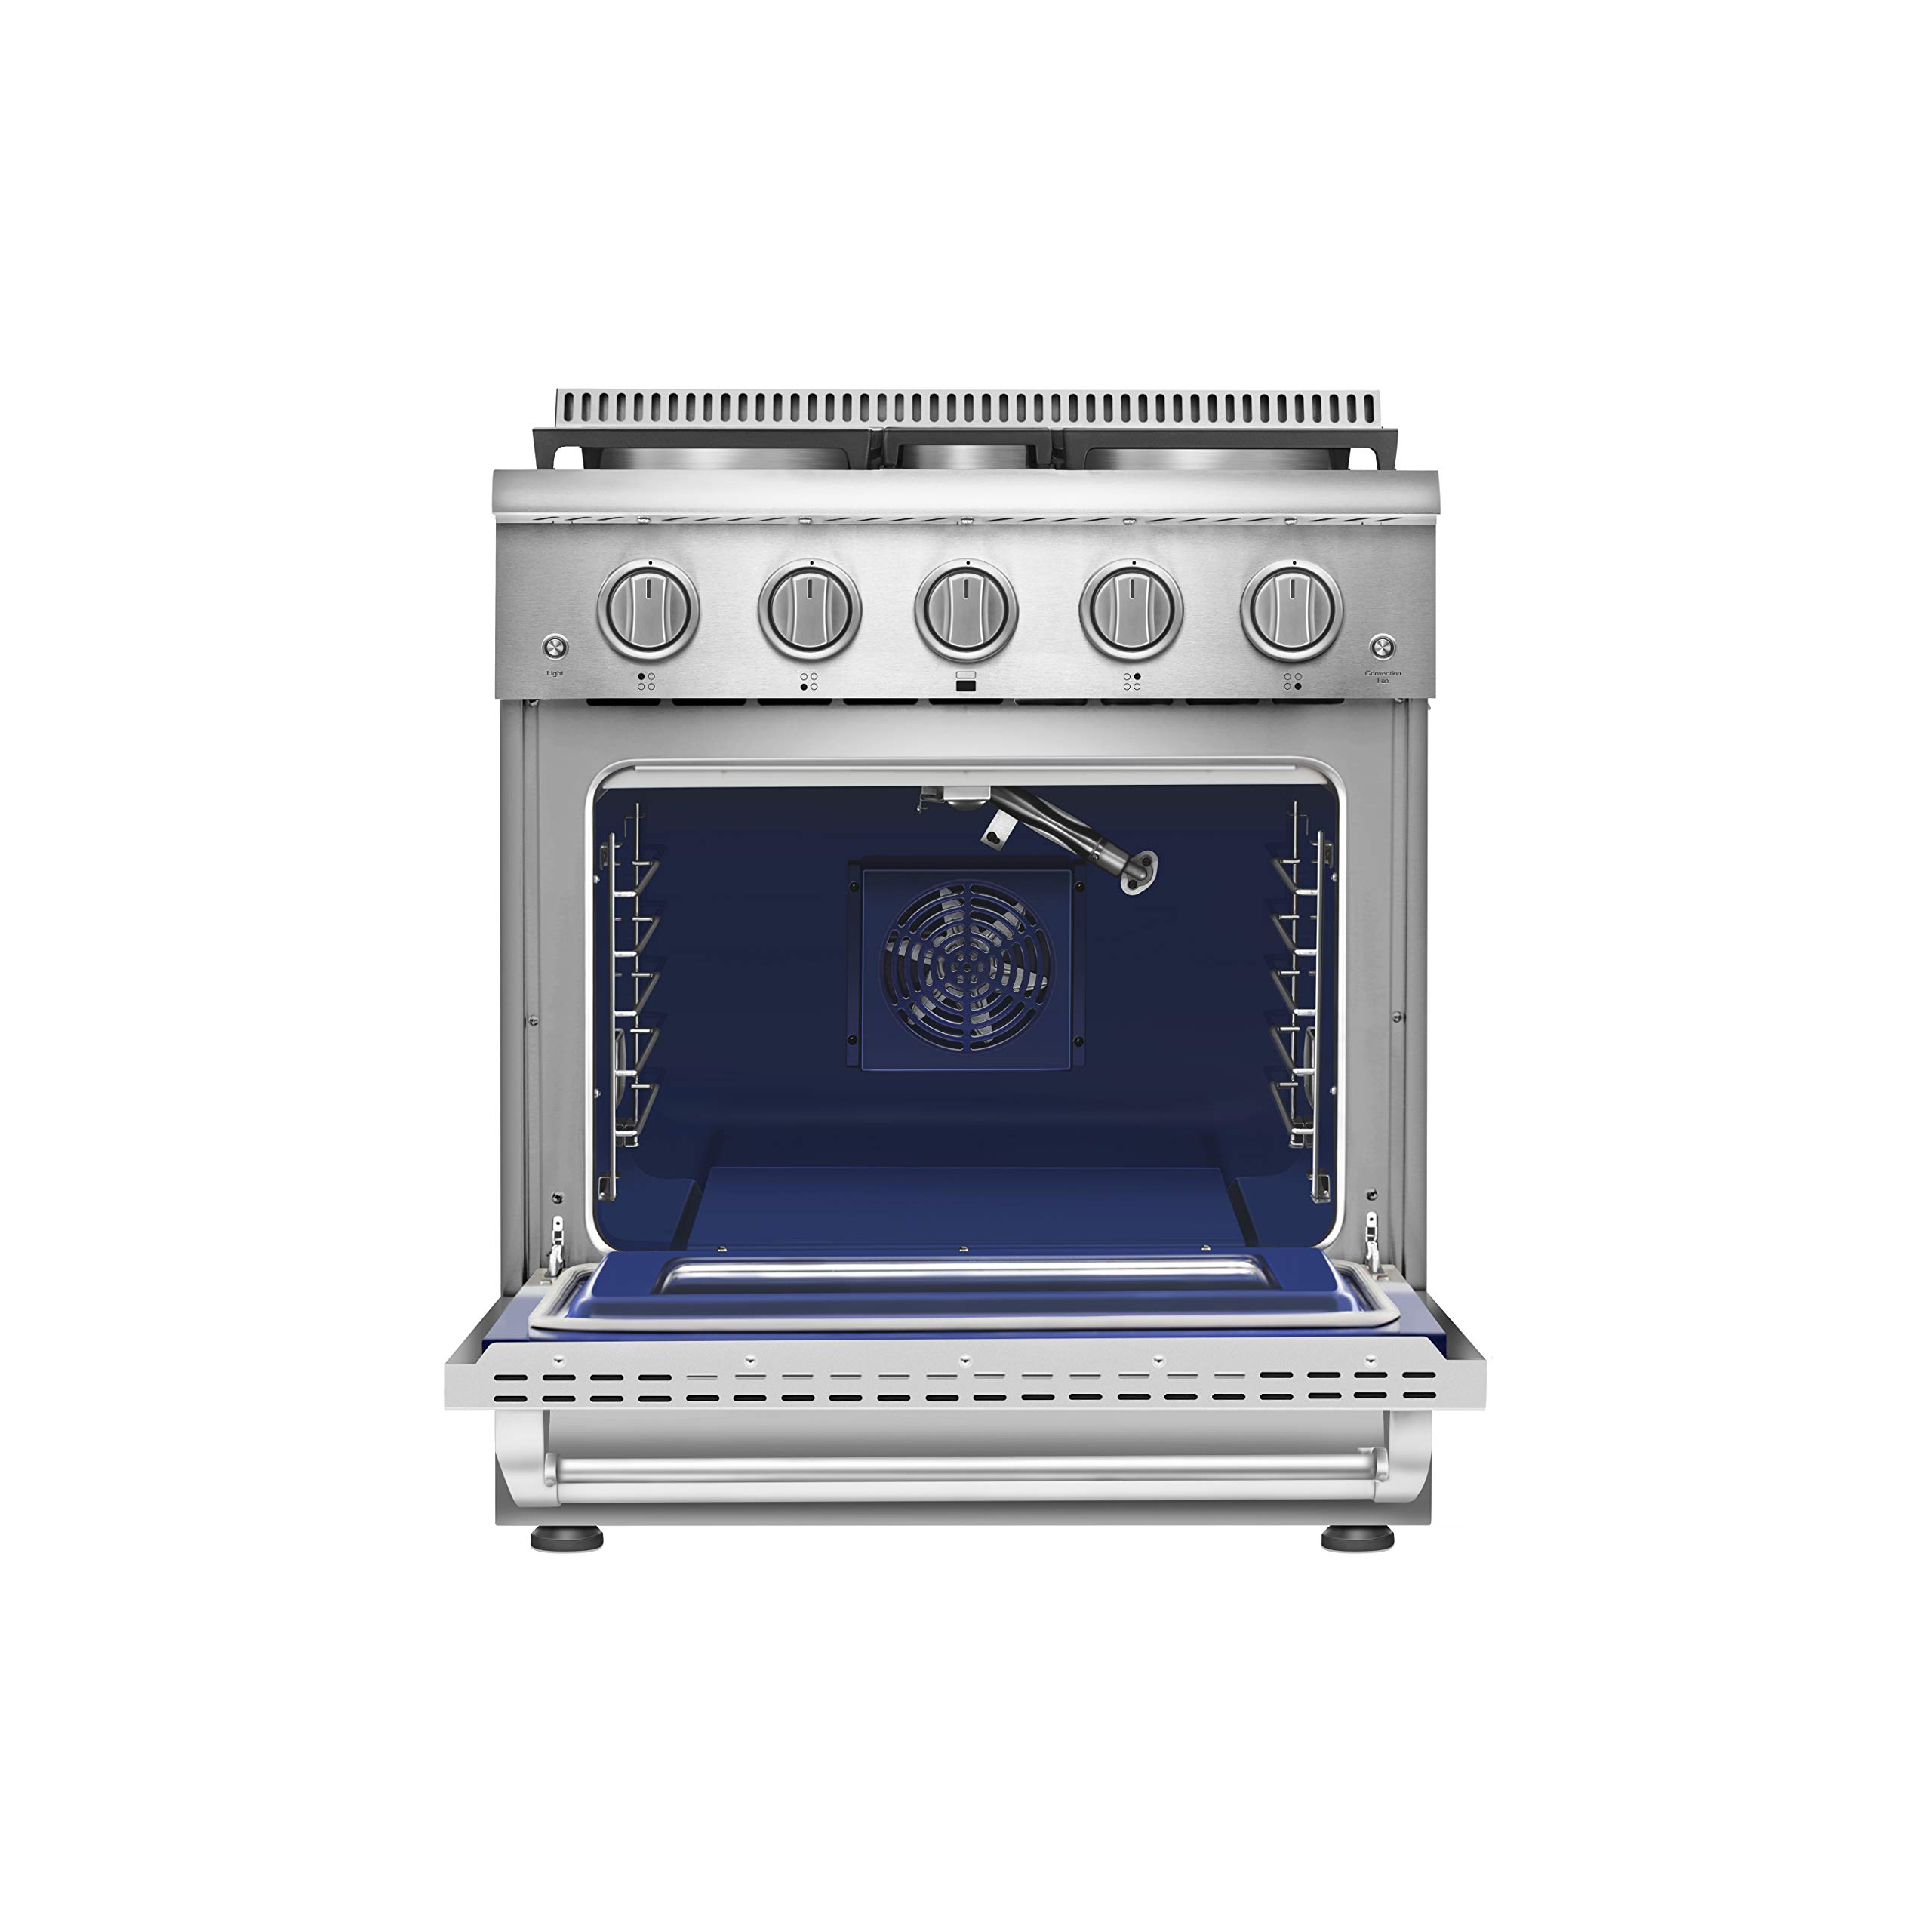 Empava Slide-in Single Oven Gas Range 30 in 4.2 cu. Ft,Pro-Style with 4 Sealed Ultra High-Low Burners-Heavy Duty Continuous Grates in Stainless Steel,CSA Certified, 30 Inch